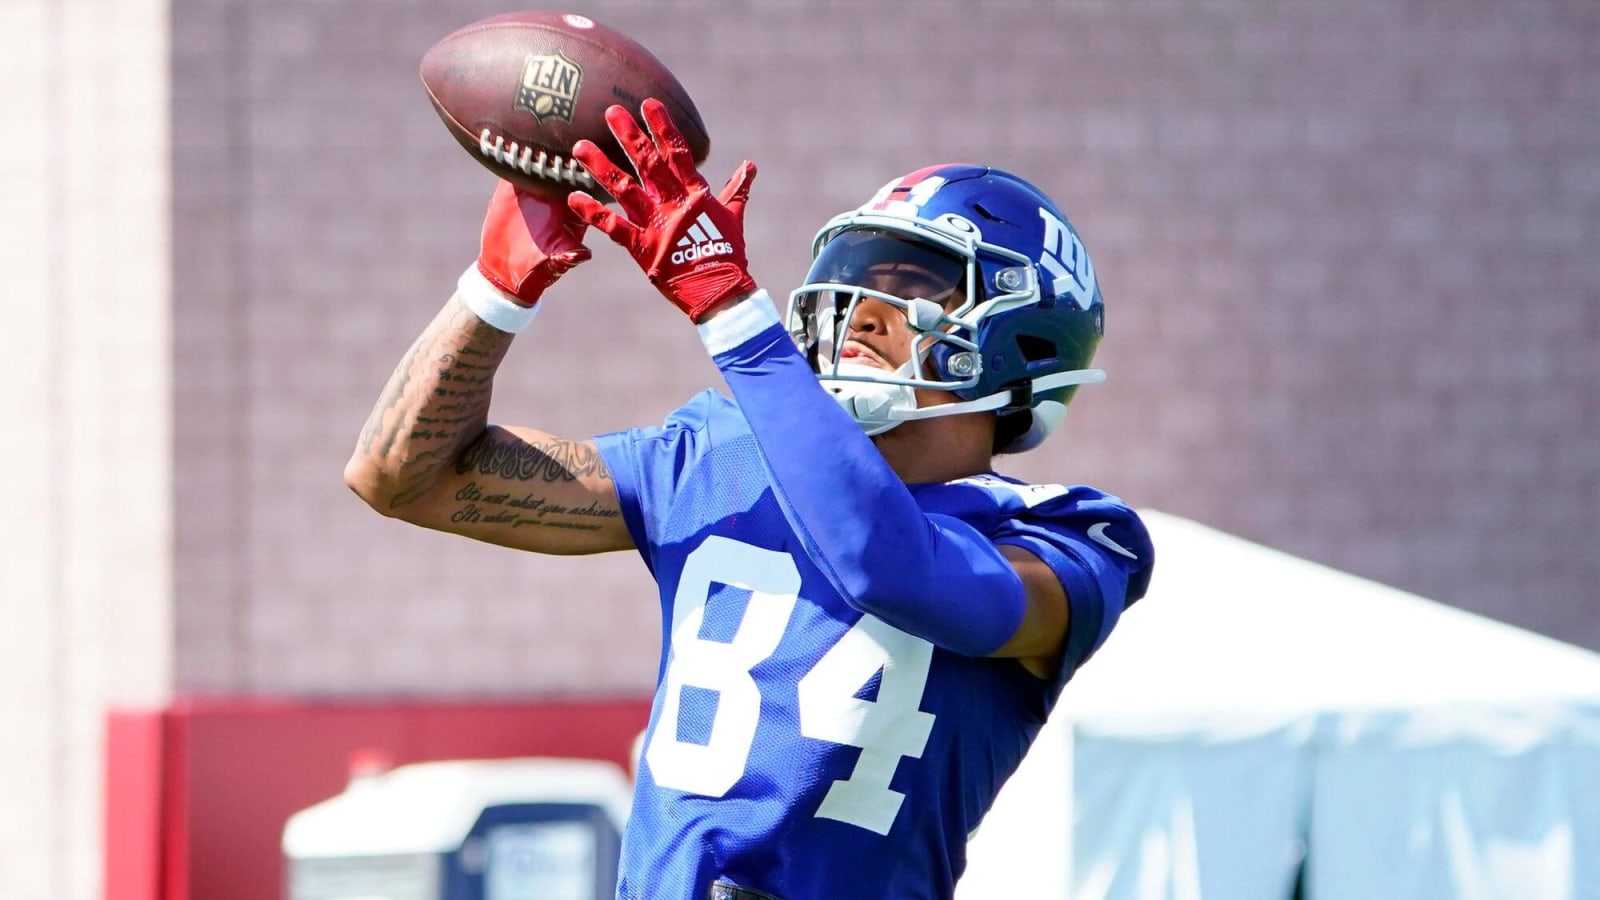 Giants’ rookie receiver stepped up when the team needed him most